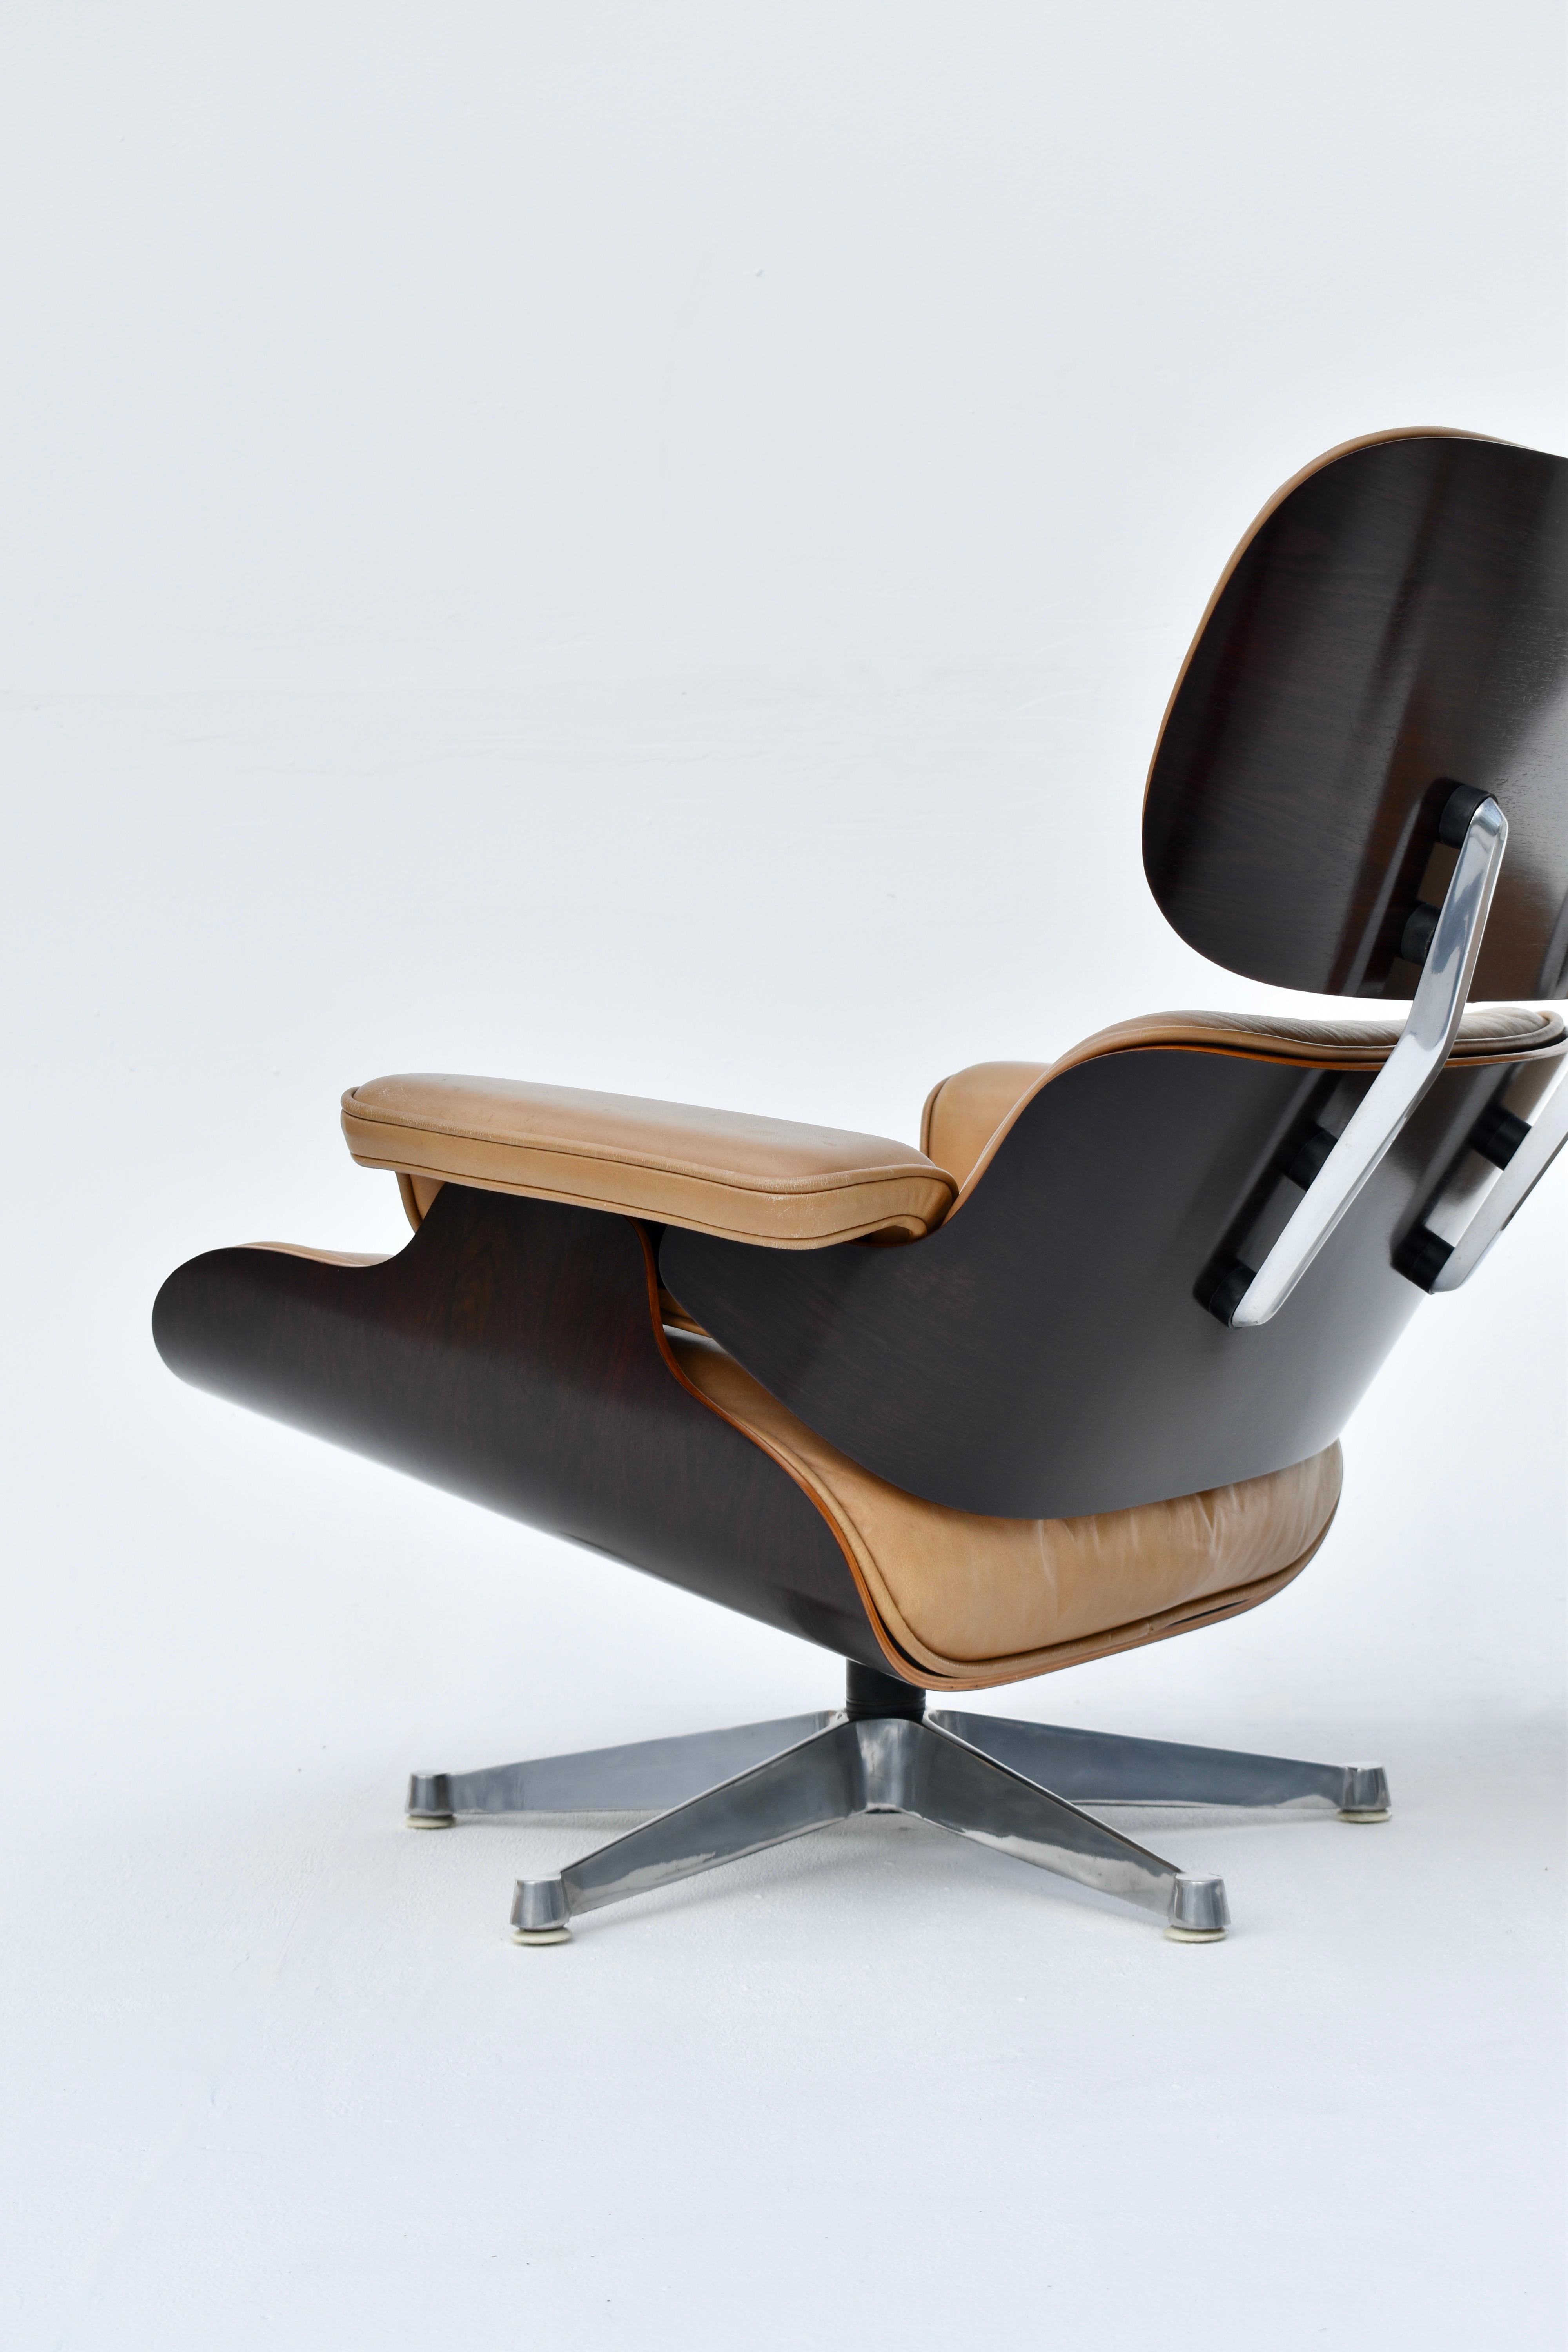 Original Eames Lounge Chair & Ottoman For ICF Italy 1